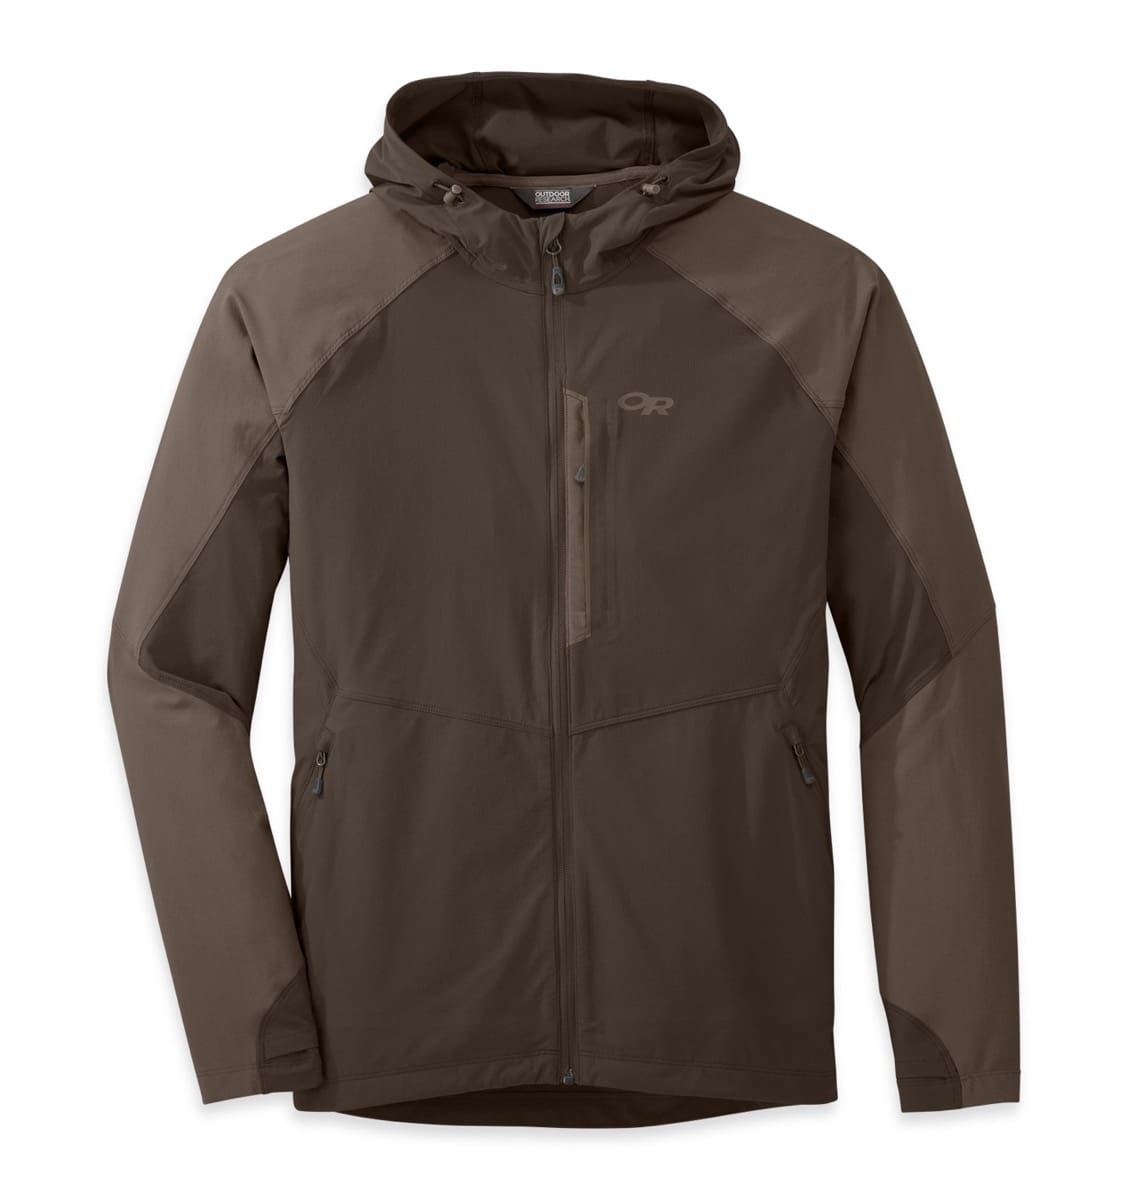 Stuff I Like - Outdoor Research Ferrosi Hooded Jacket - Soldier Systems ...